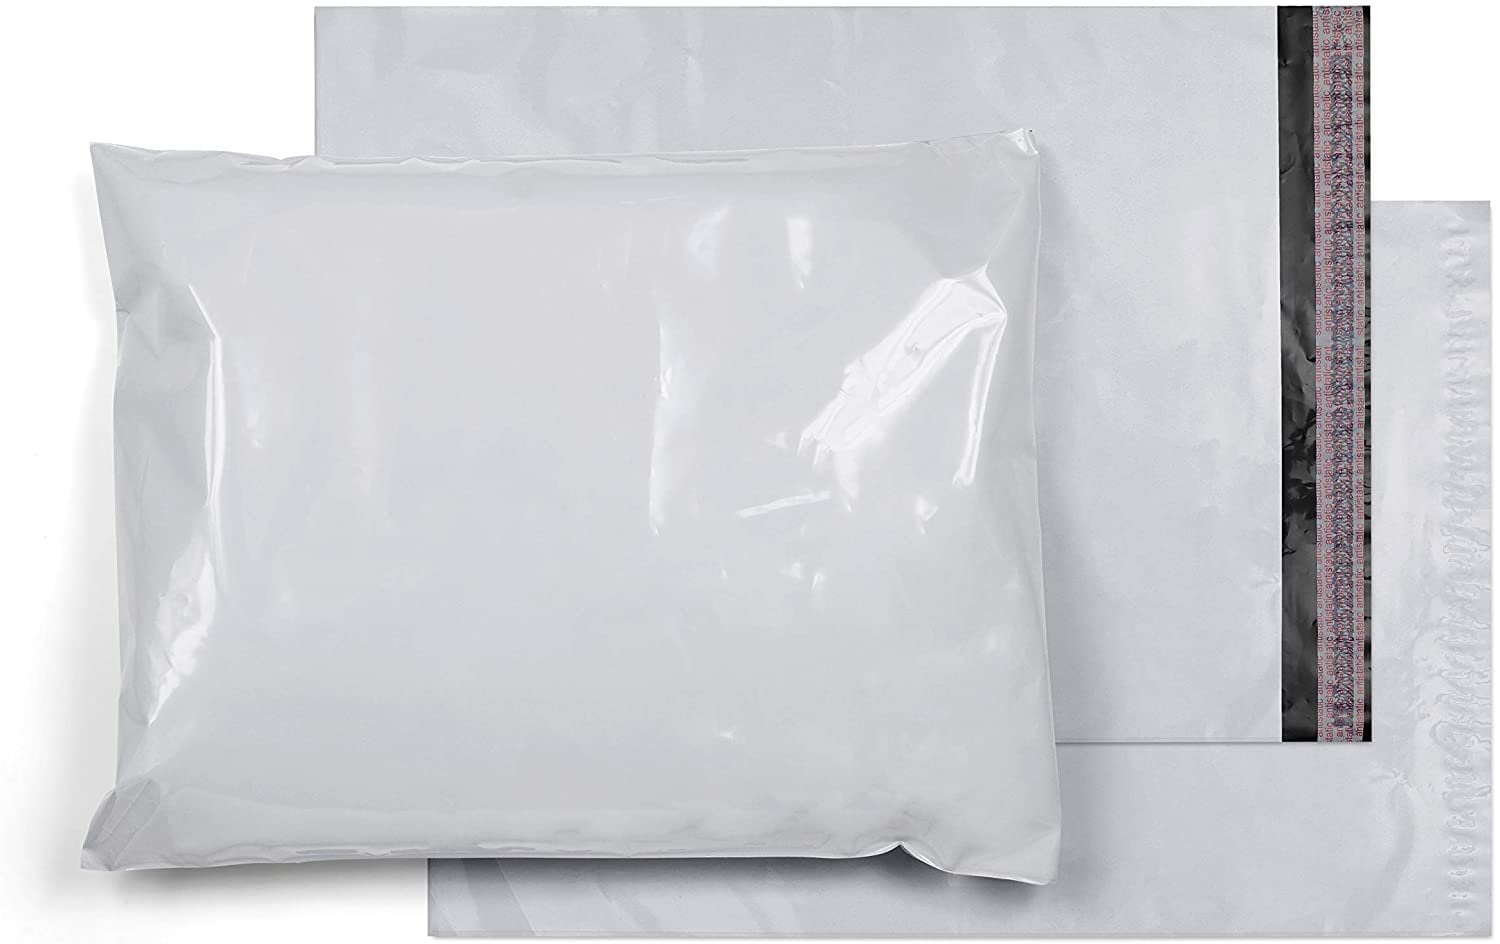 White Peel & Seal 500 Pack 7.5x10.5 Poly Mailers Shipping Envelope Mailer Bags 2 Mil 7.5 x 10.5 inch